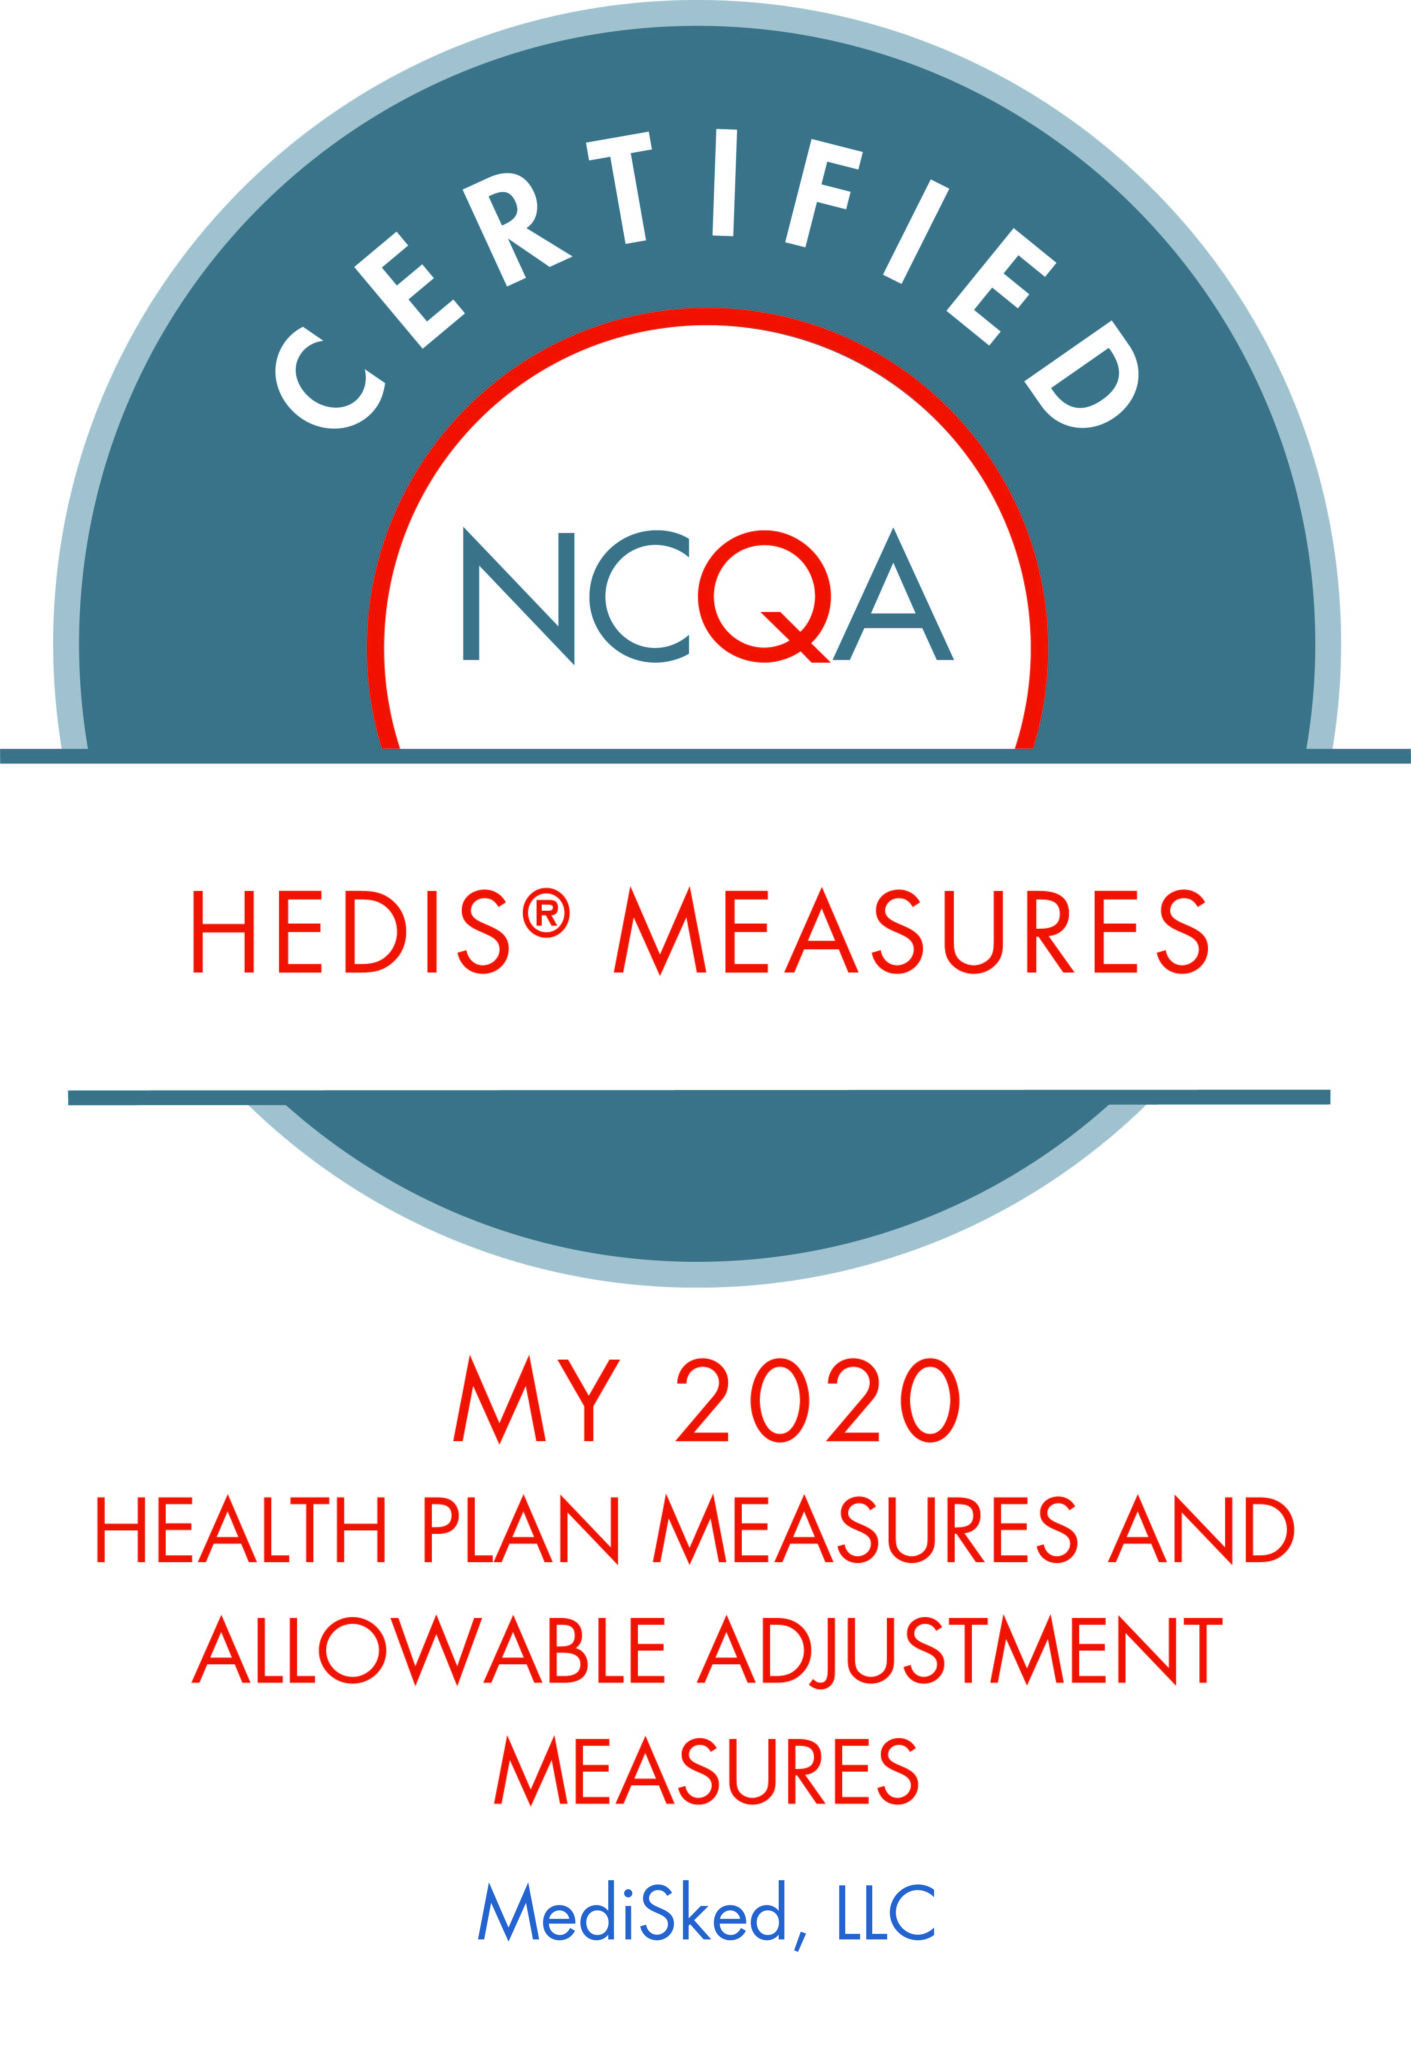 NCQA Certification for Hedis Measures. MY2020 Health Plan Measures and Allowable Adjustment Measures awarded to MediSked, LLC.